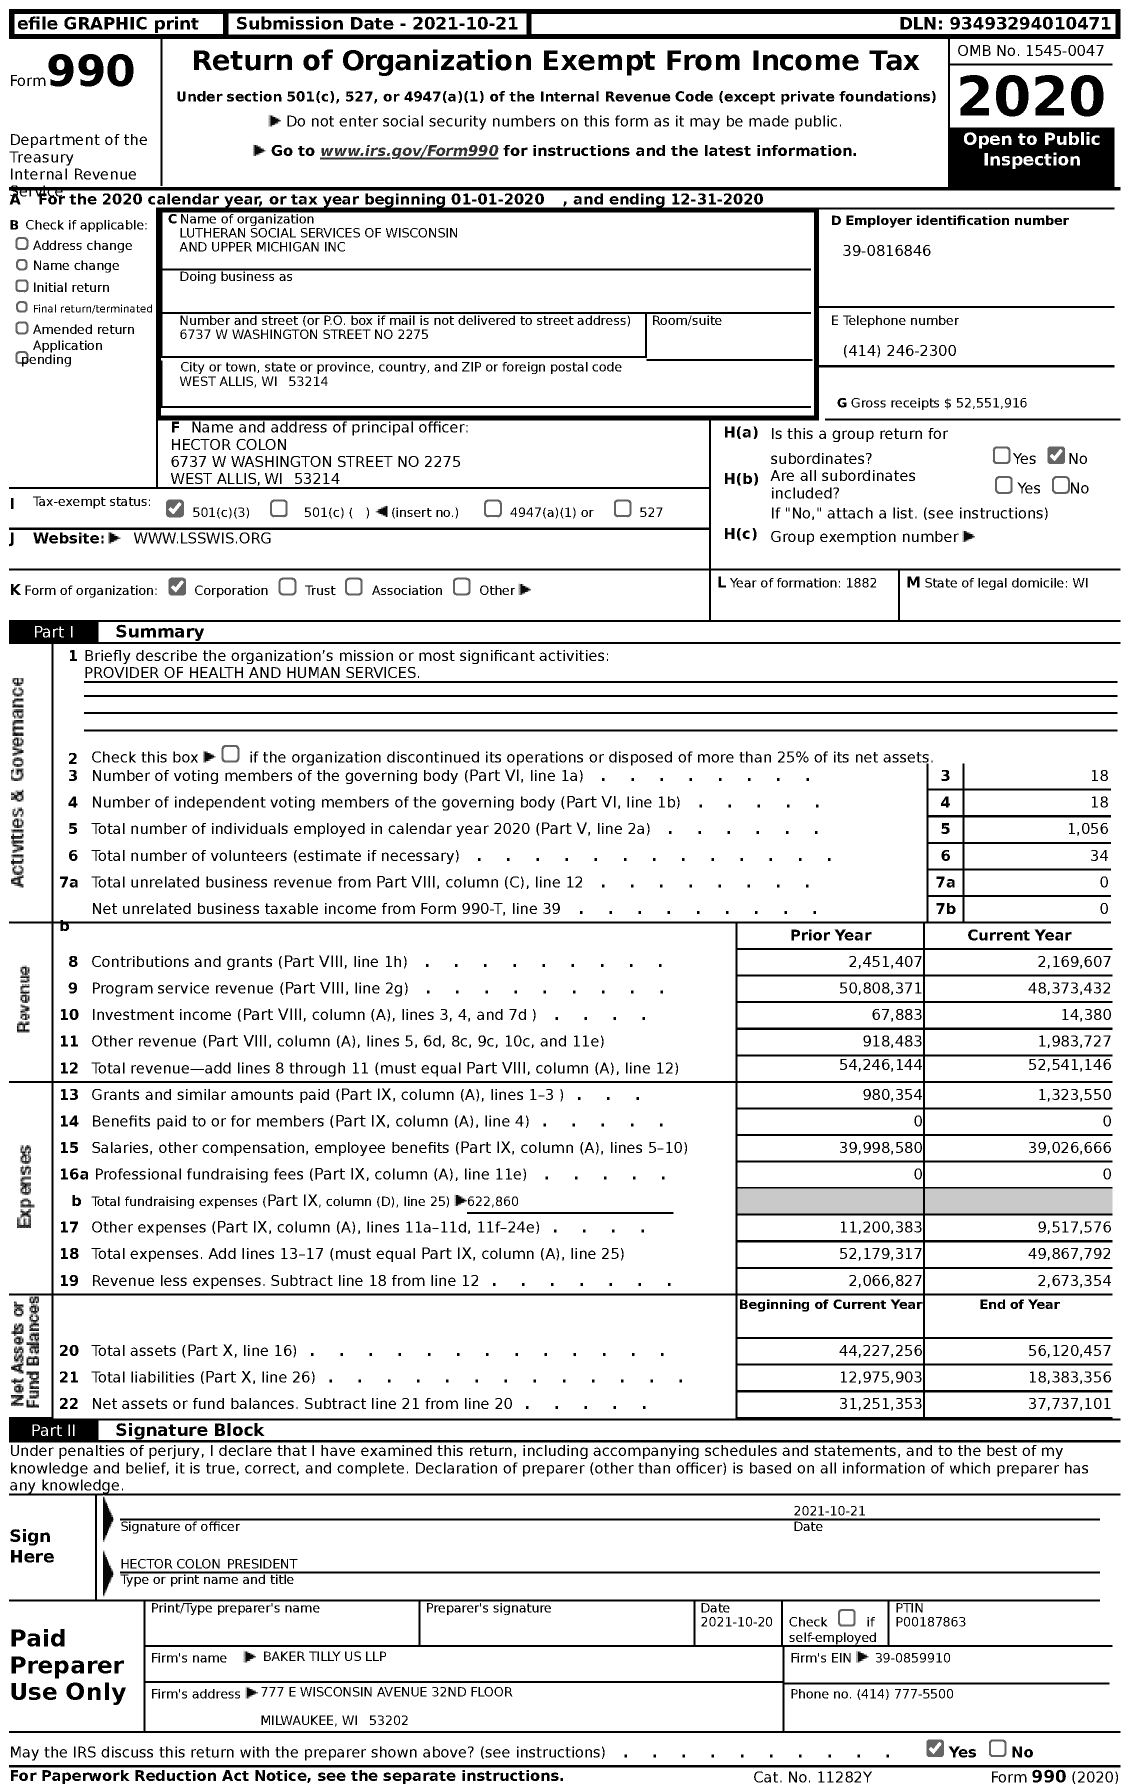 Image of first page of 2020 Form 990 for Lutheran Social Services of Wisconsin and Upper Michigan (LSS)